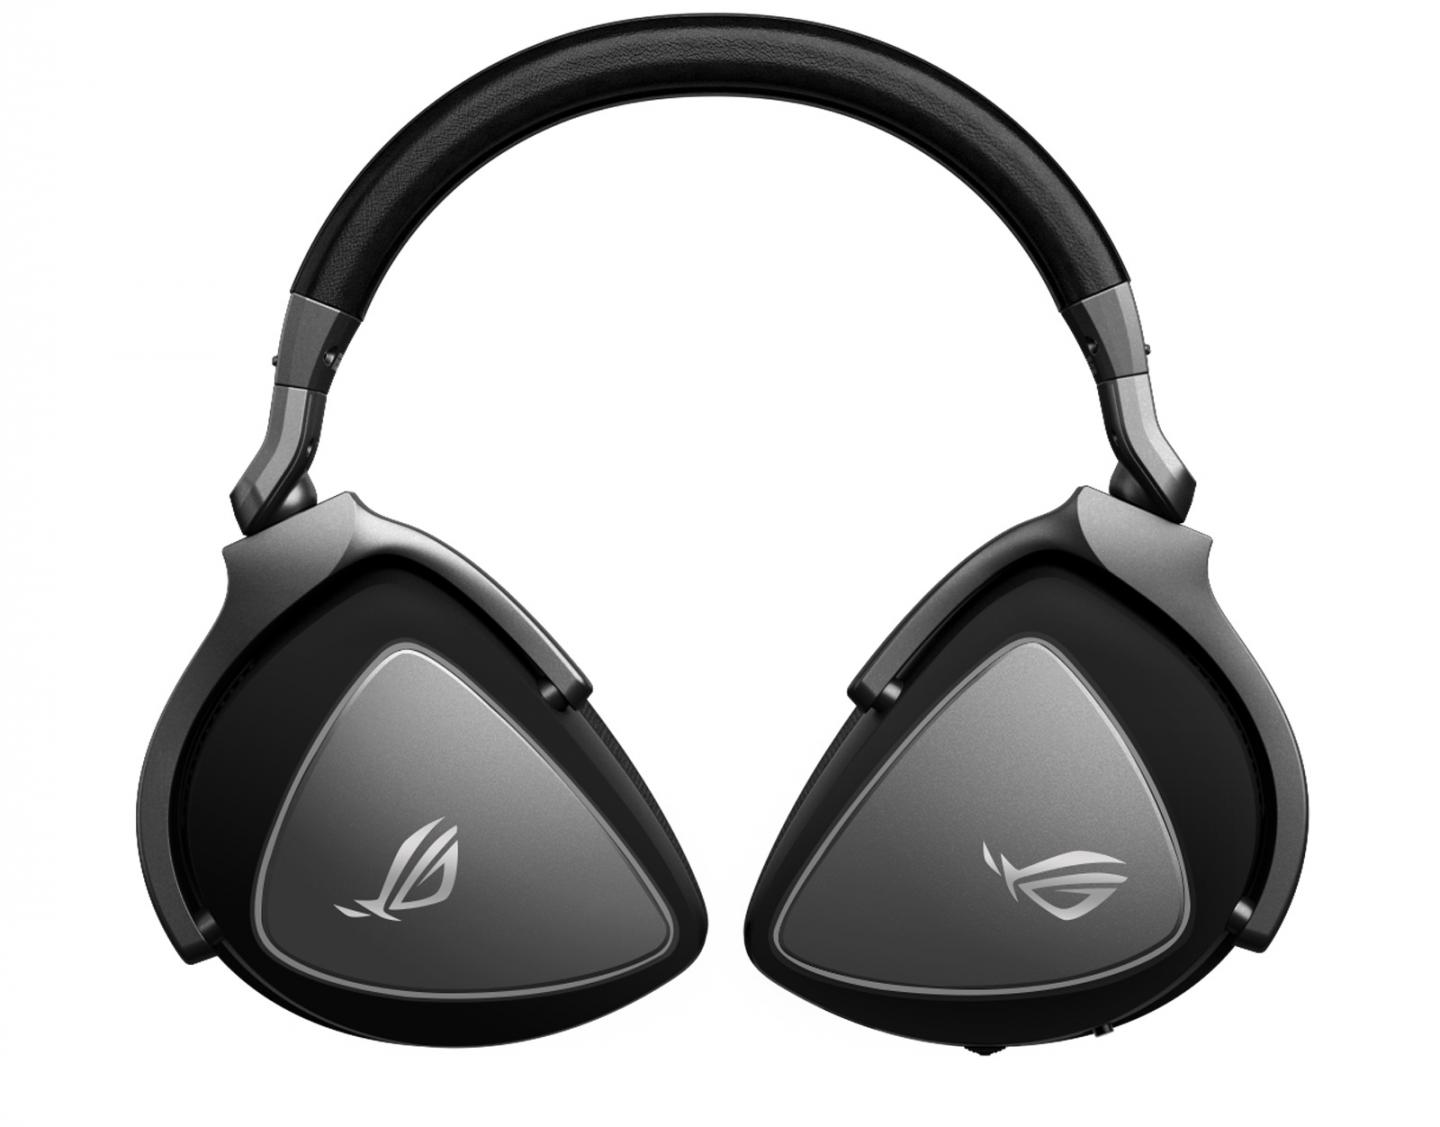 Rog-delta-core-gaming-headset-3